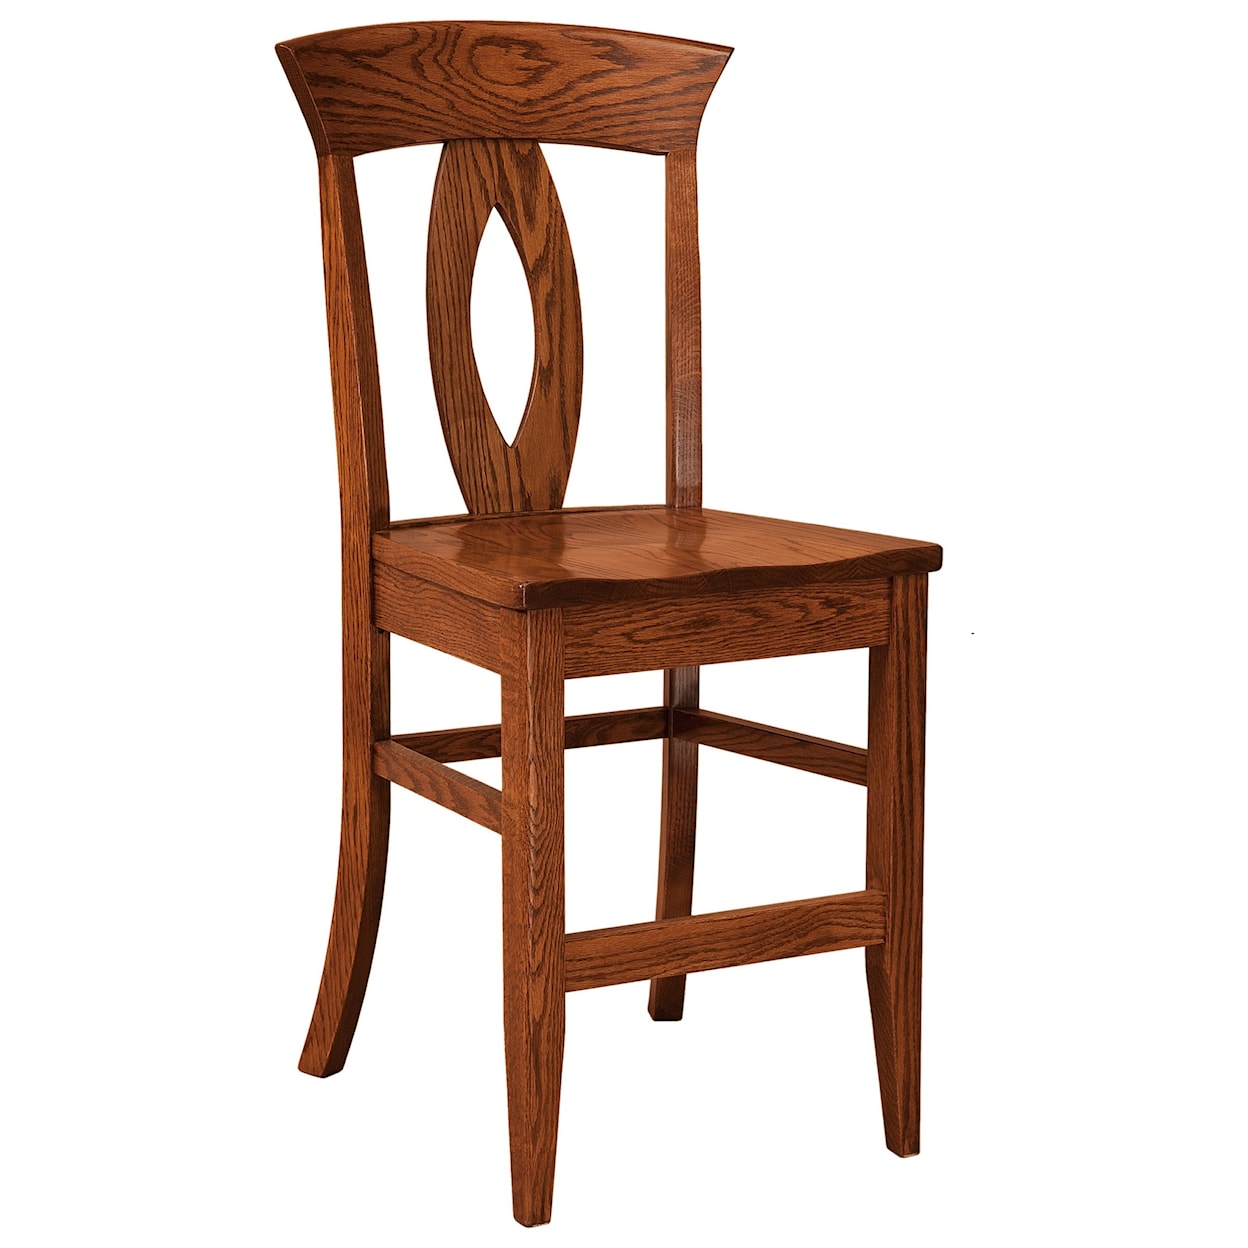 F&N Woodworking Brookfield Stationary Bar Stool - Leather Seat